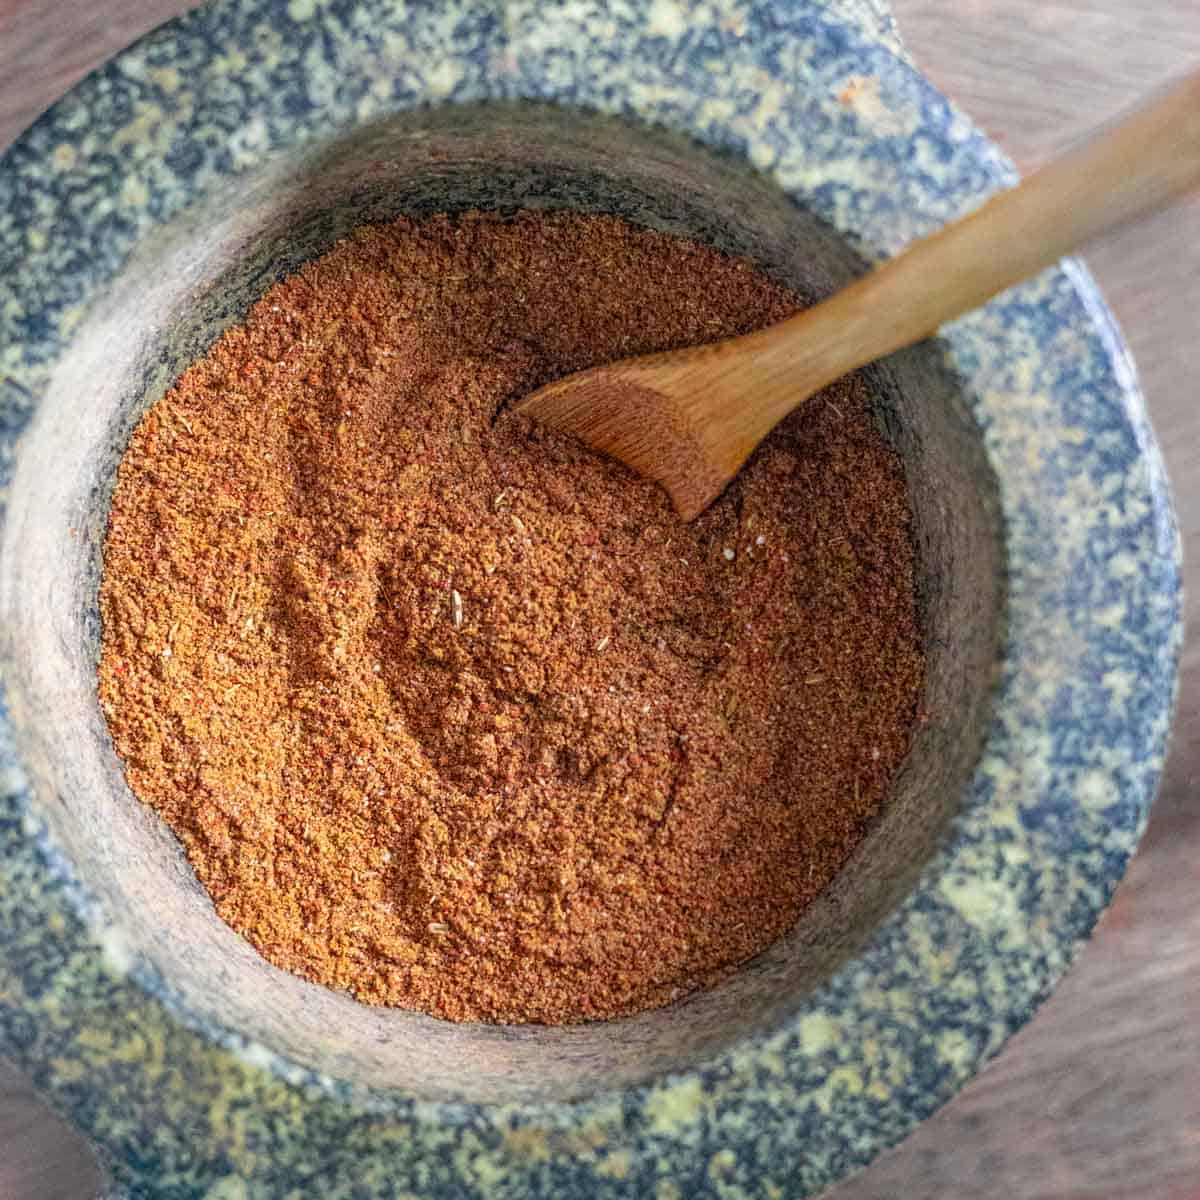 Pulled pork barbecue rub in a granite mortar with a small wooden spoon in the bowl.